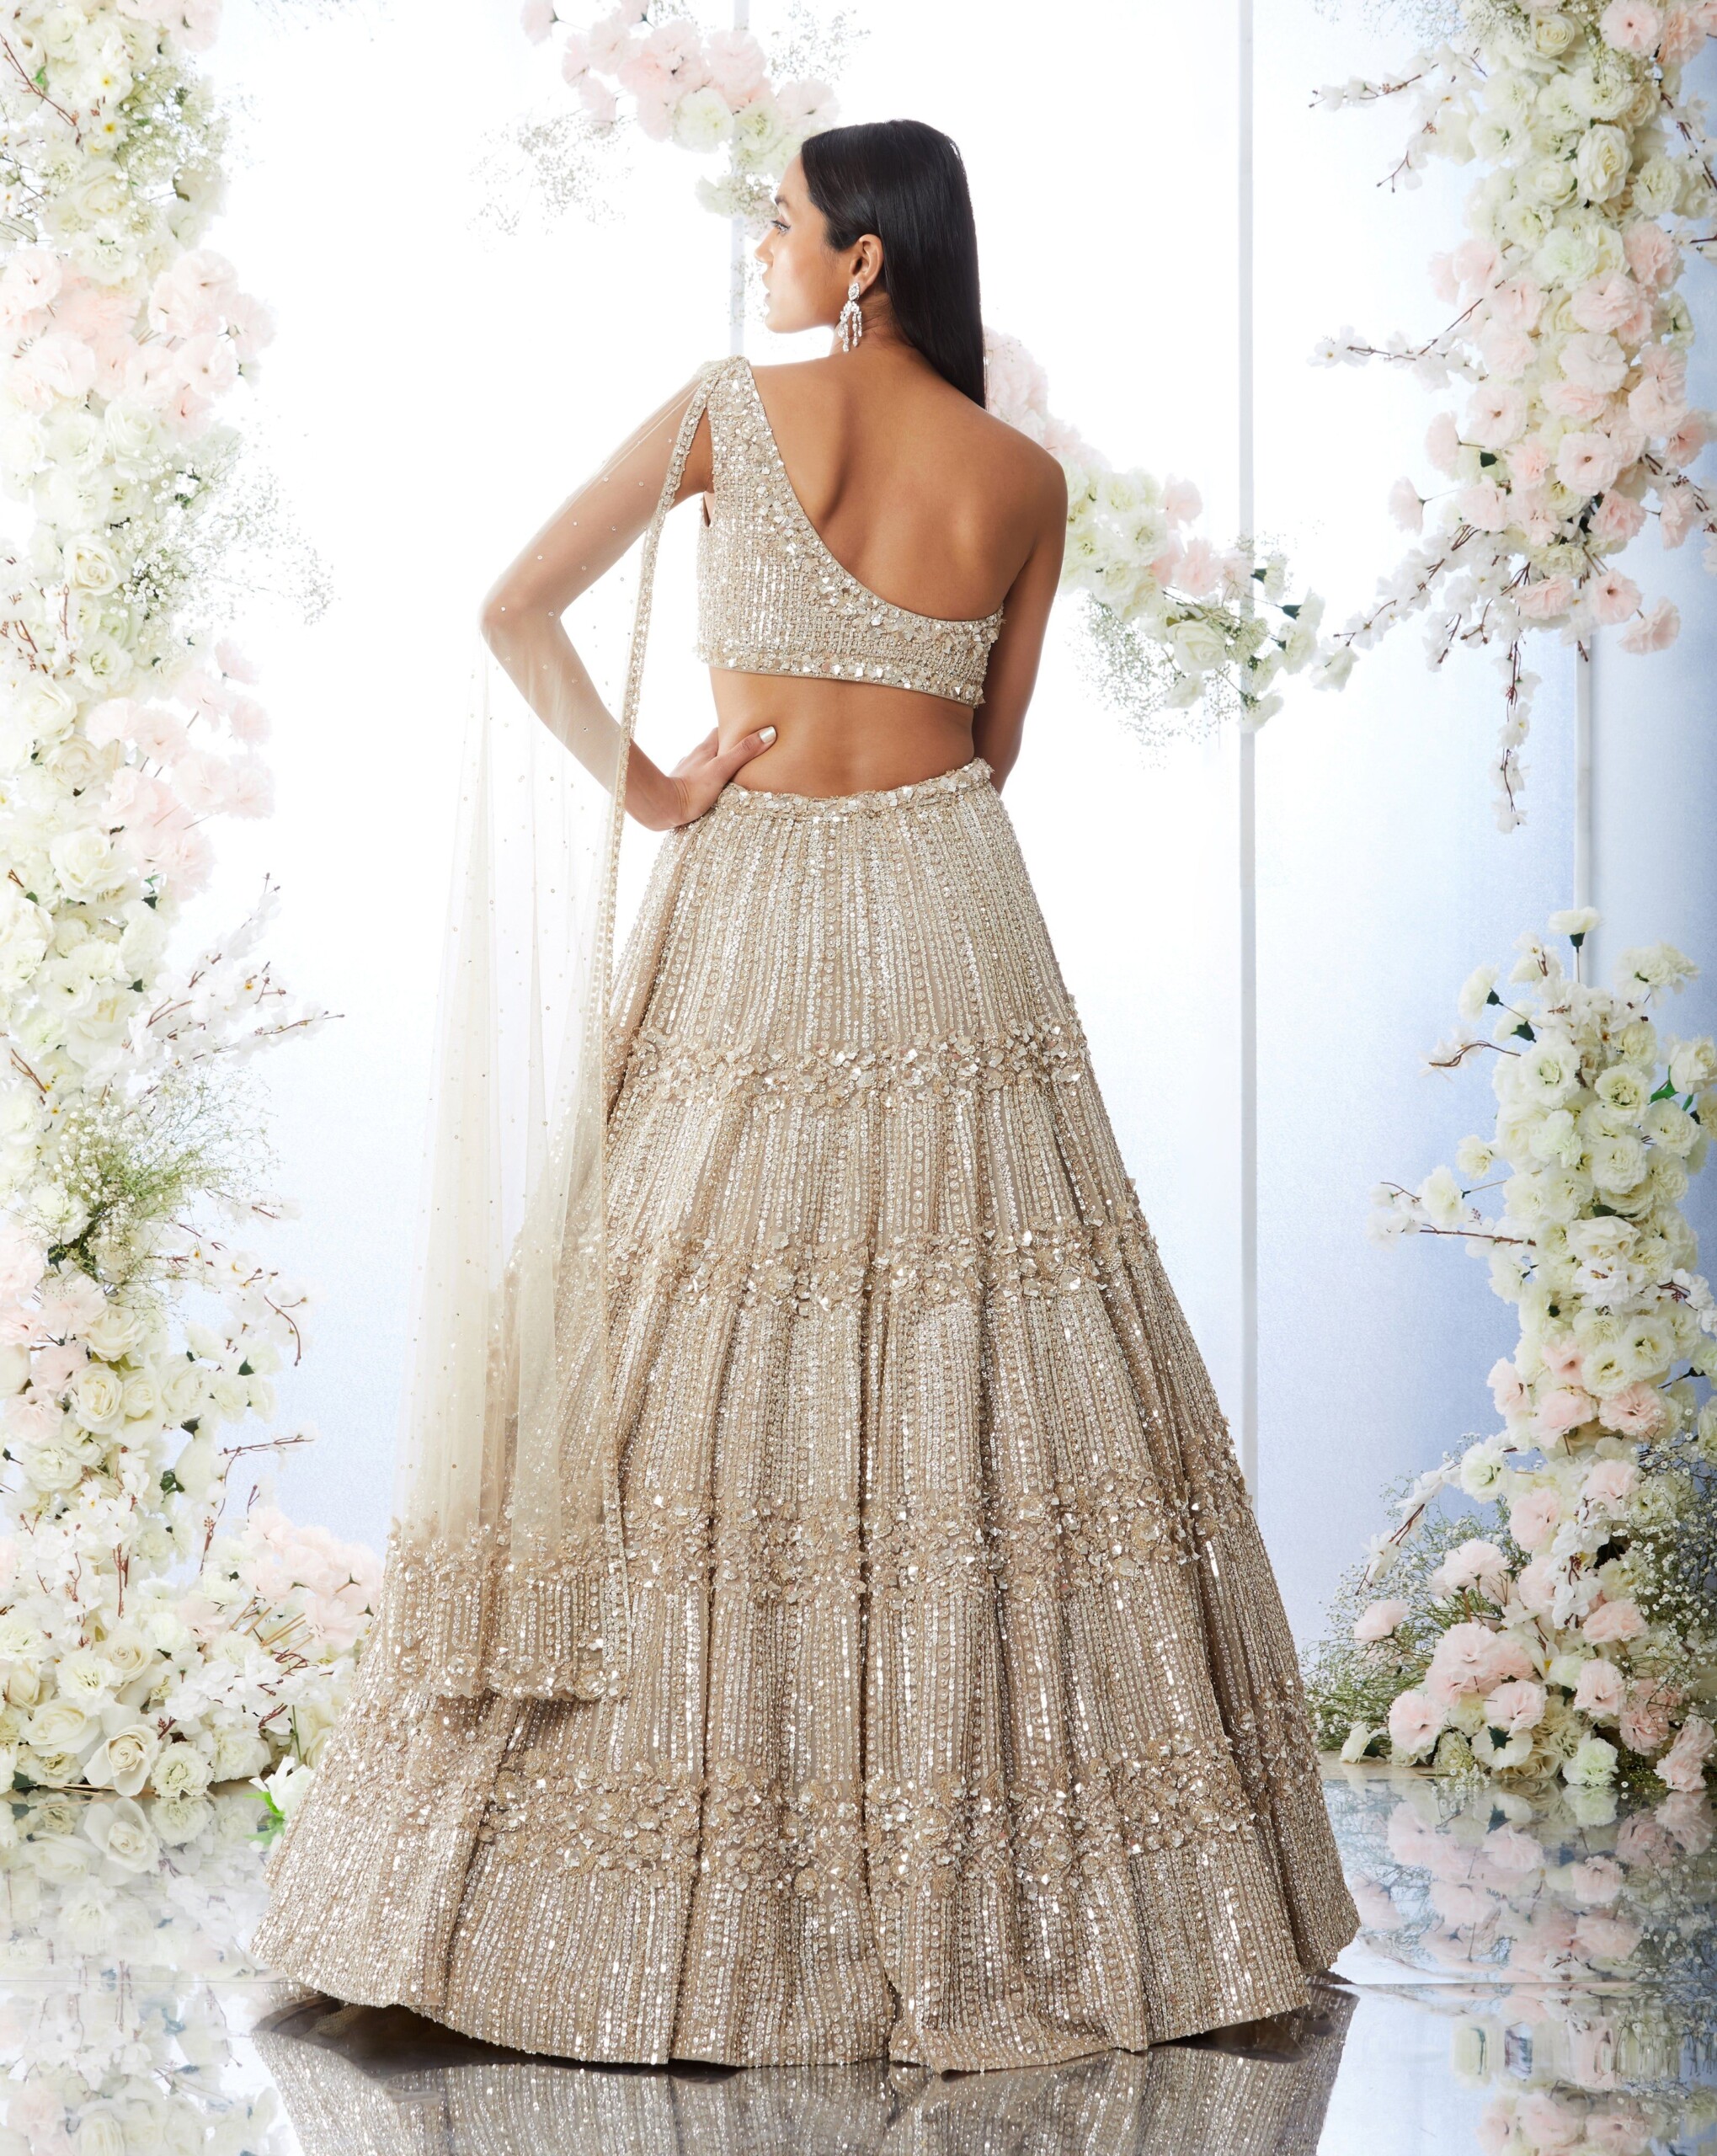 The One-Sleeved Crop Top Lehenga With Dupatta